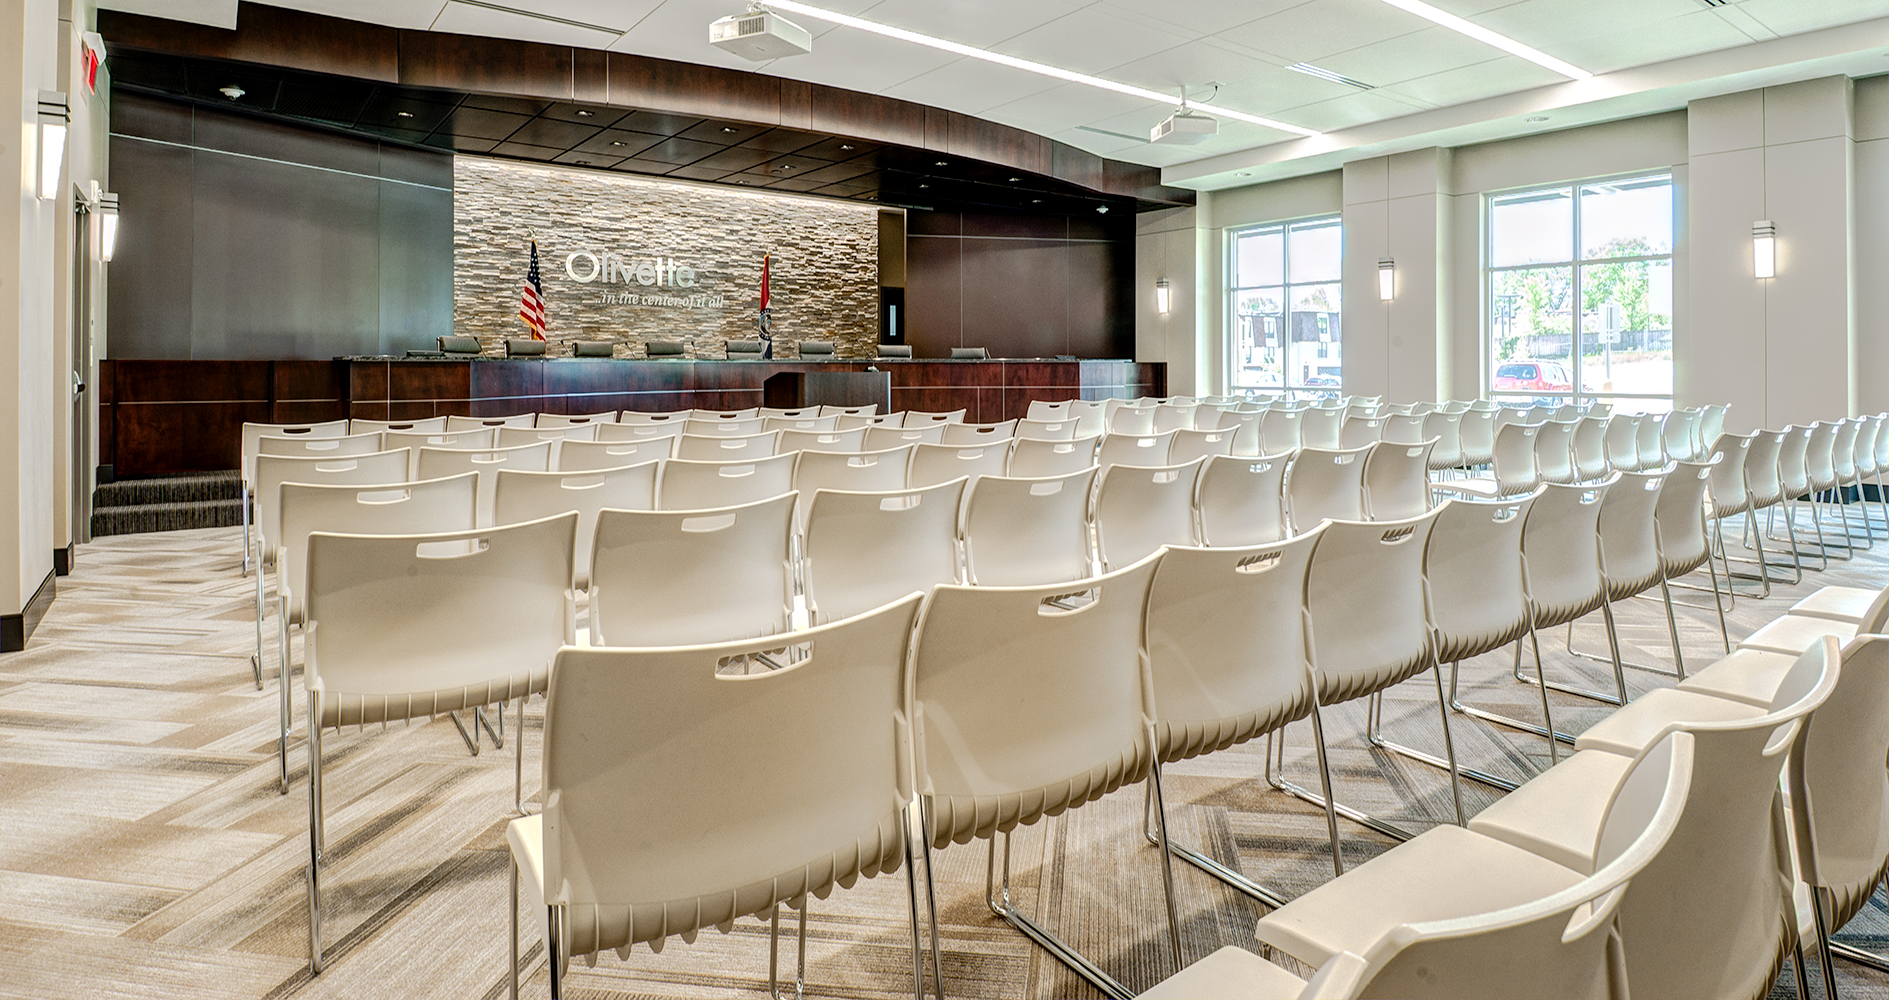 Wedge sconces provide sophisticated architectural lighting for a modern town meeting hall 